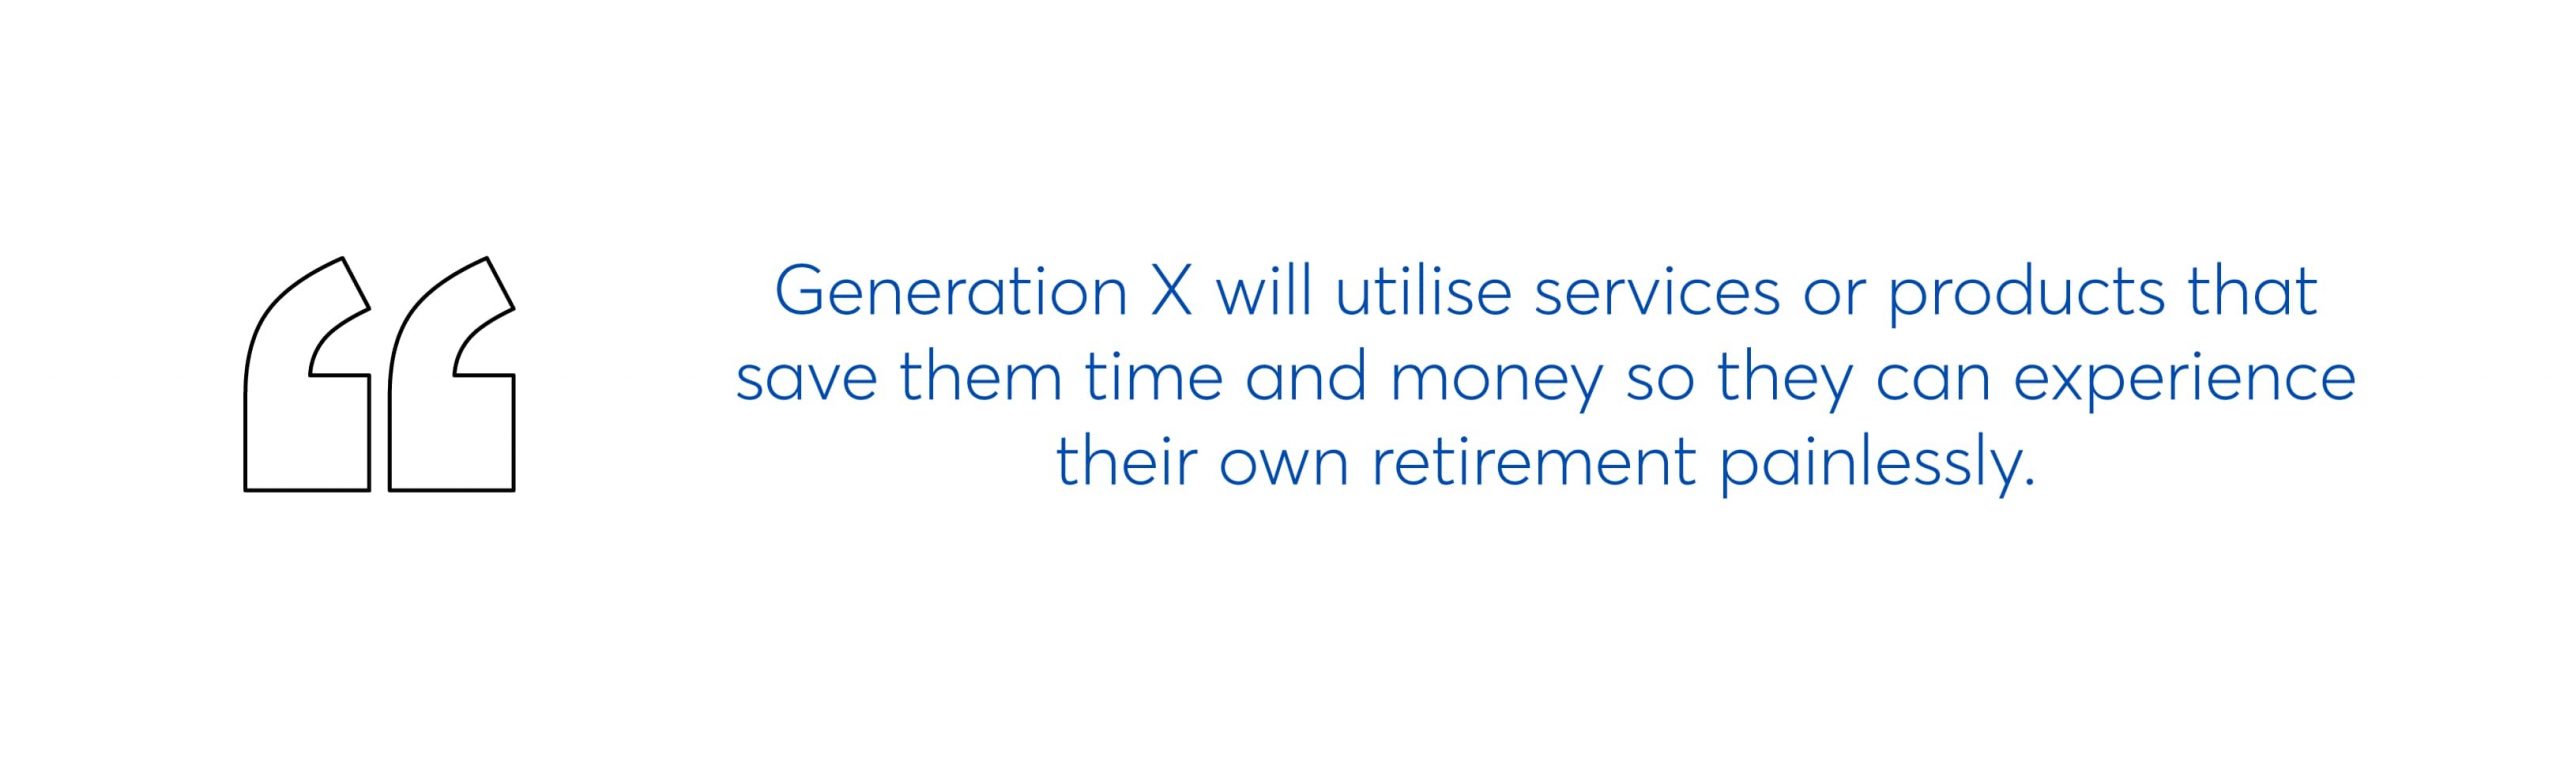 generation x will utilise services or products that save them time and money so they can experience their own retirement painlessly